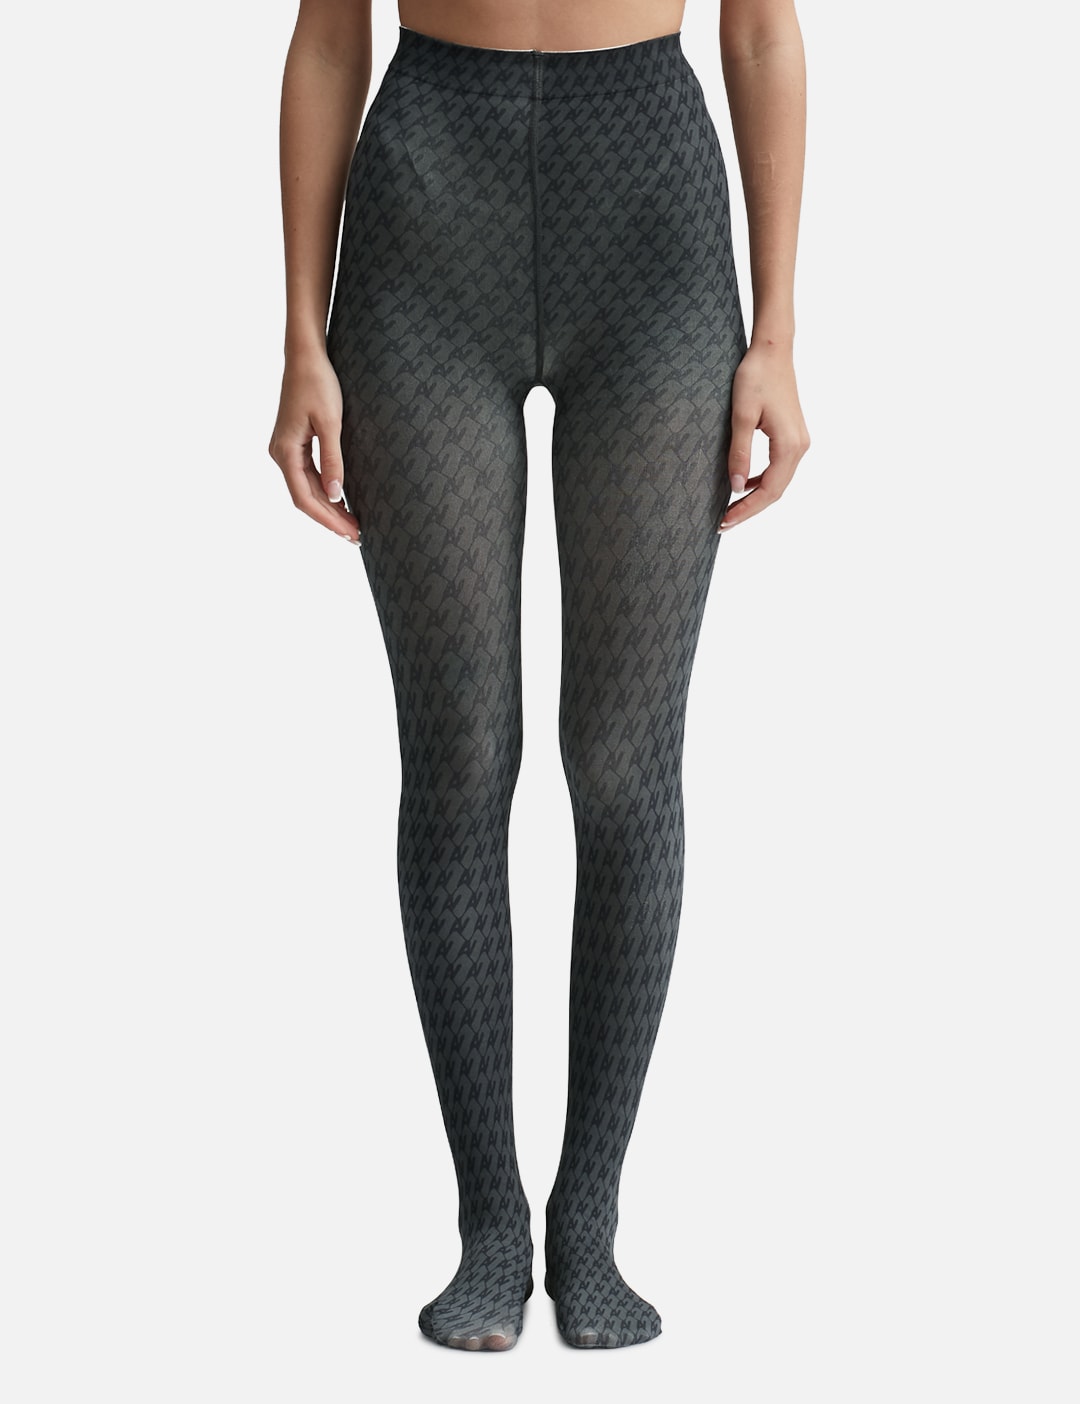 AVAVAV - Patterned Tights  HBX - Globally Curated Fashion and Lifestyle by  Hypebeast